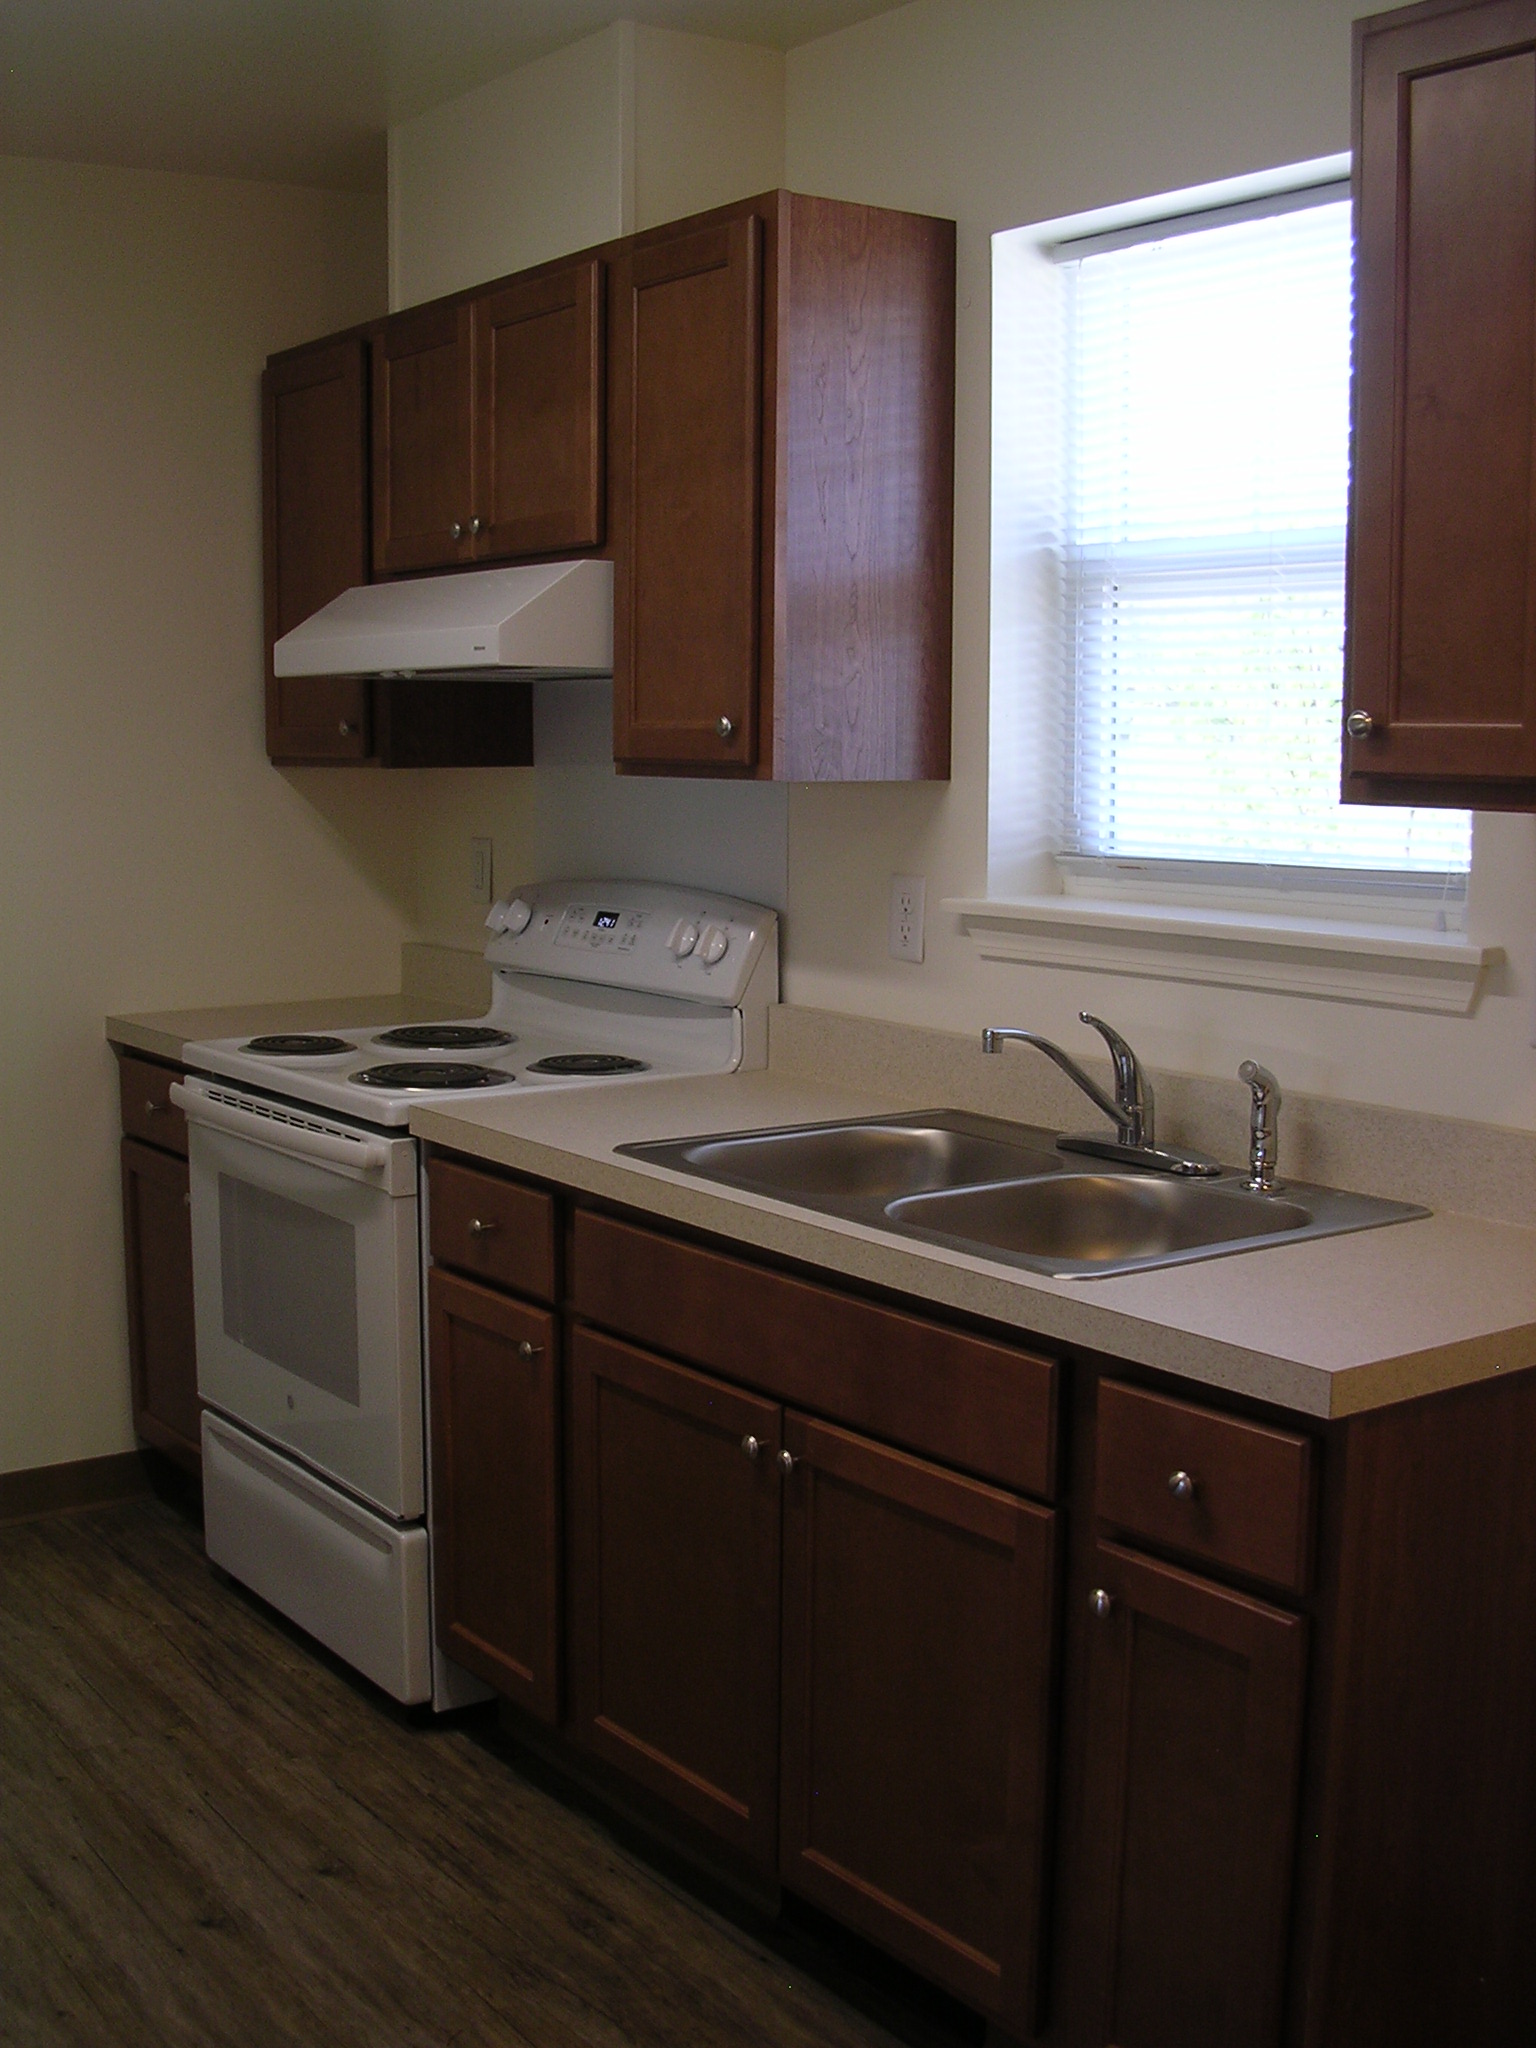 property management company client list syracuse ny side kitchen image of island hollow townhomes